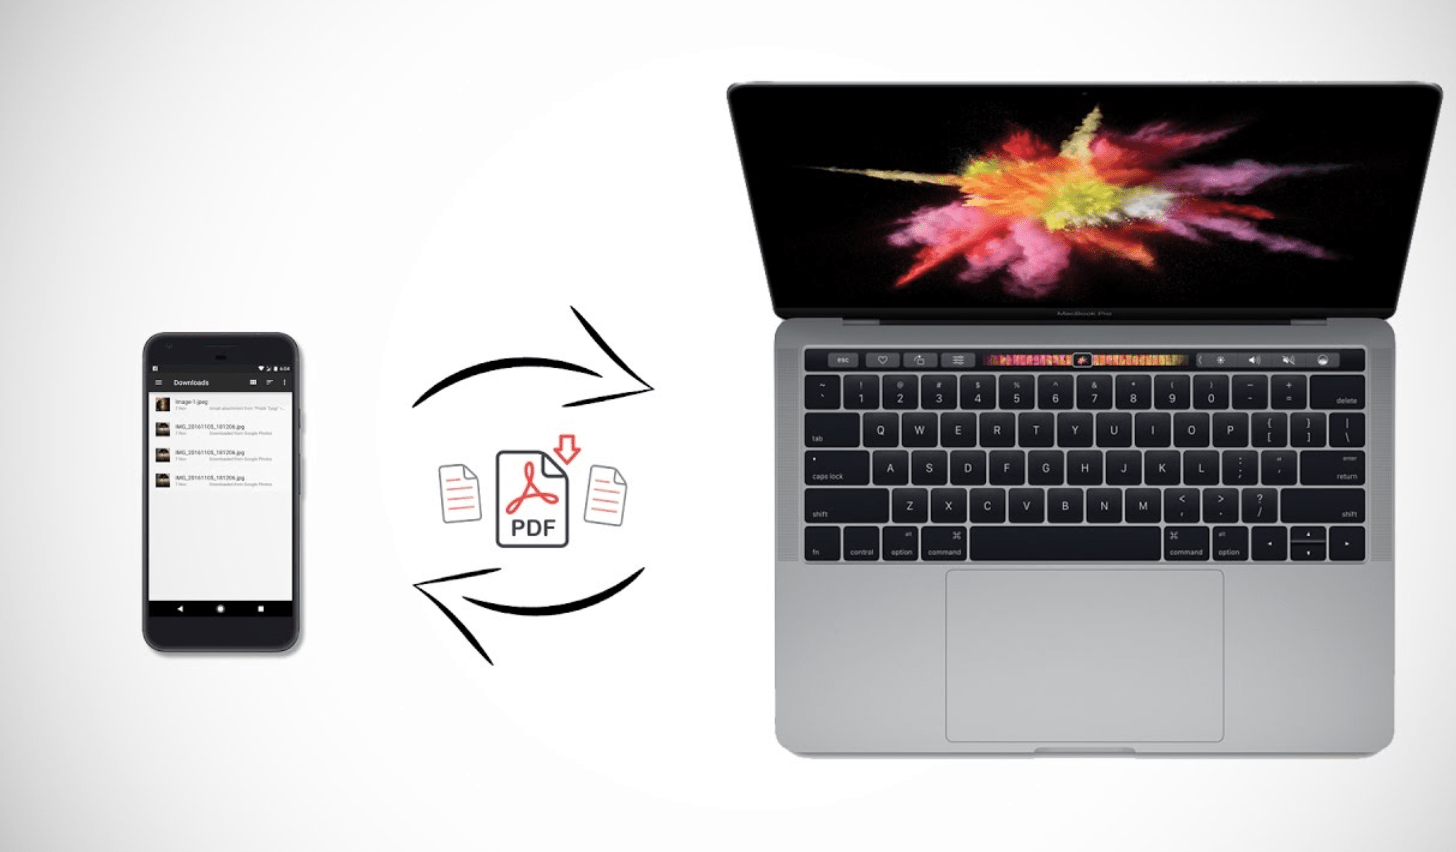 How to transfer files from Android to Mac